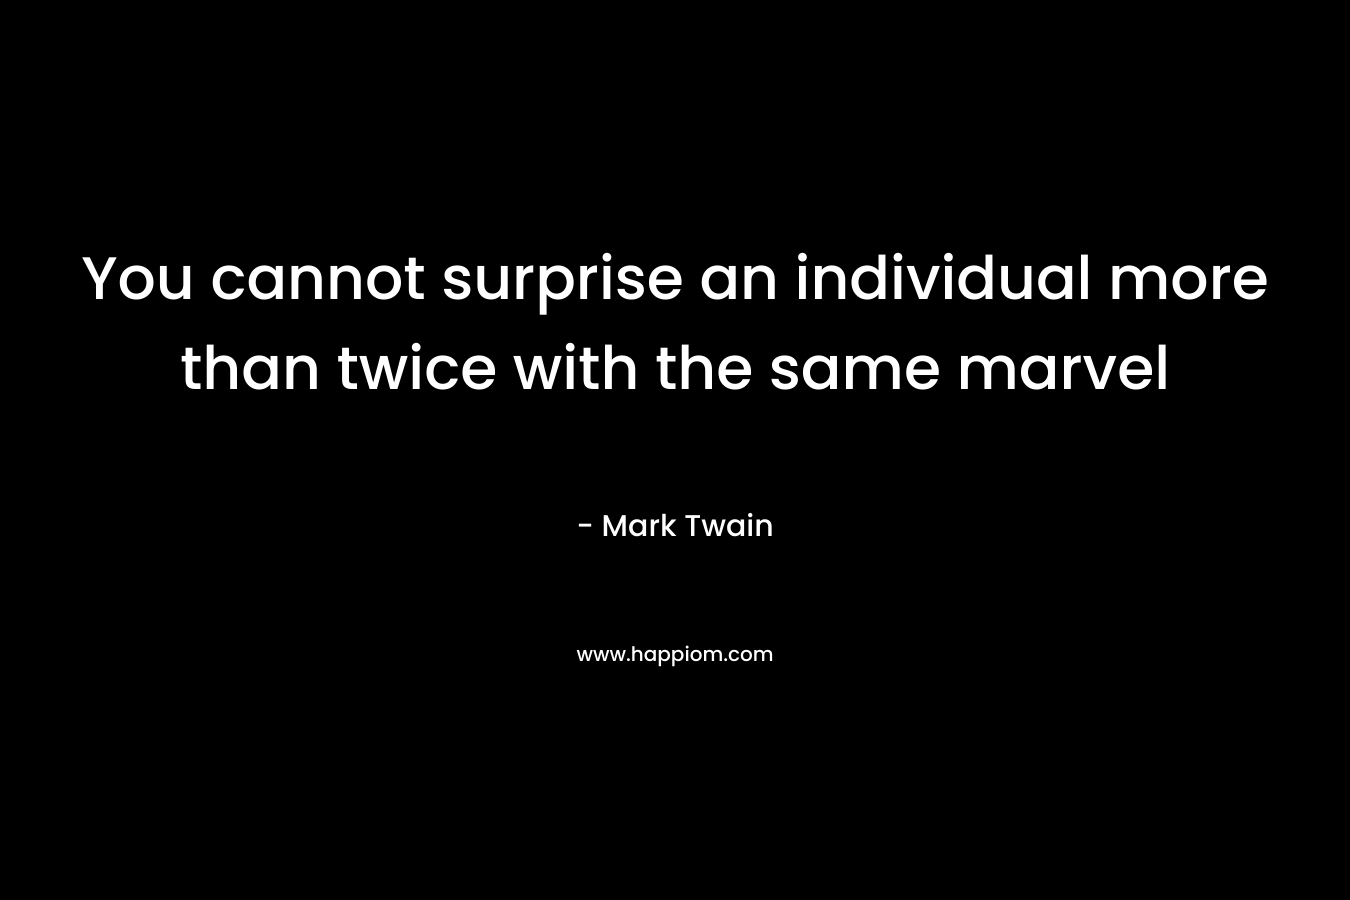 You cannot surprise an individual more than twice with the same marvel